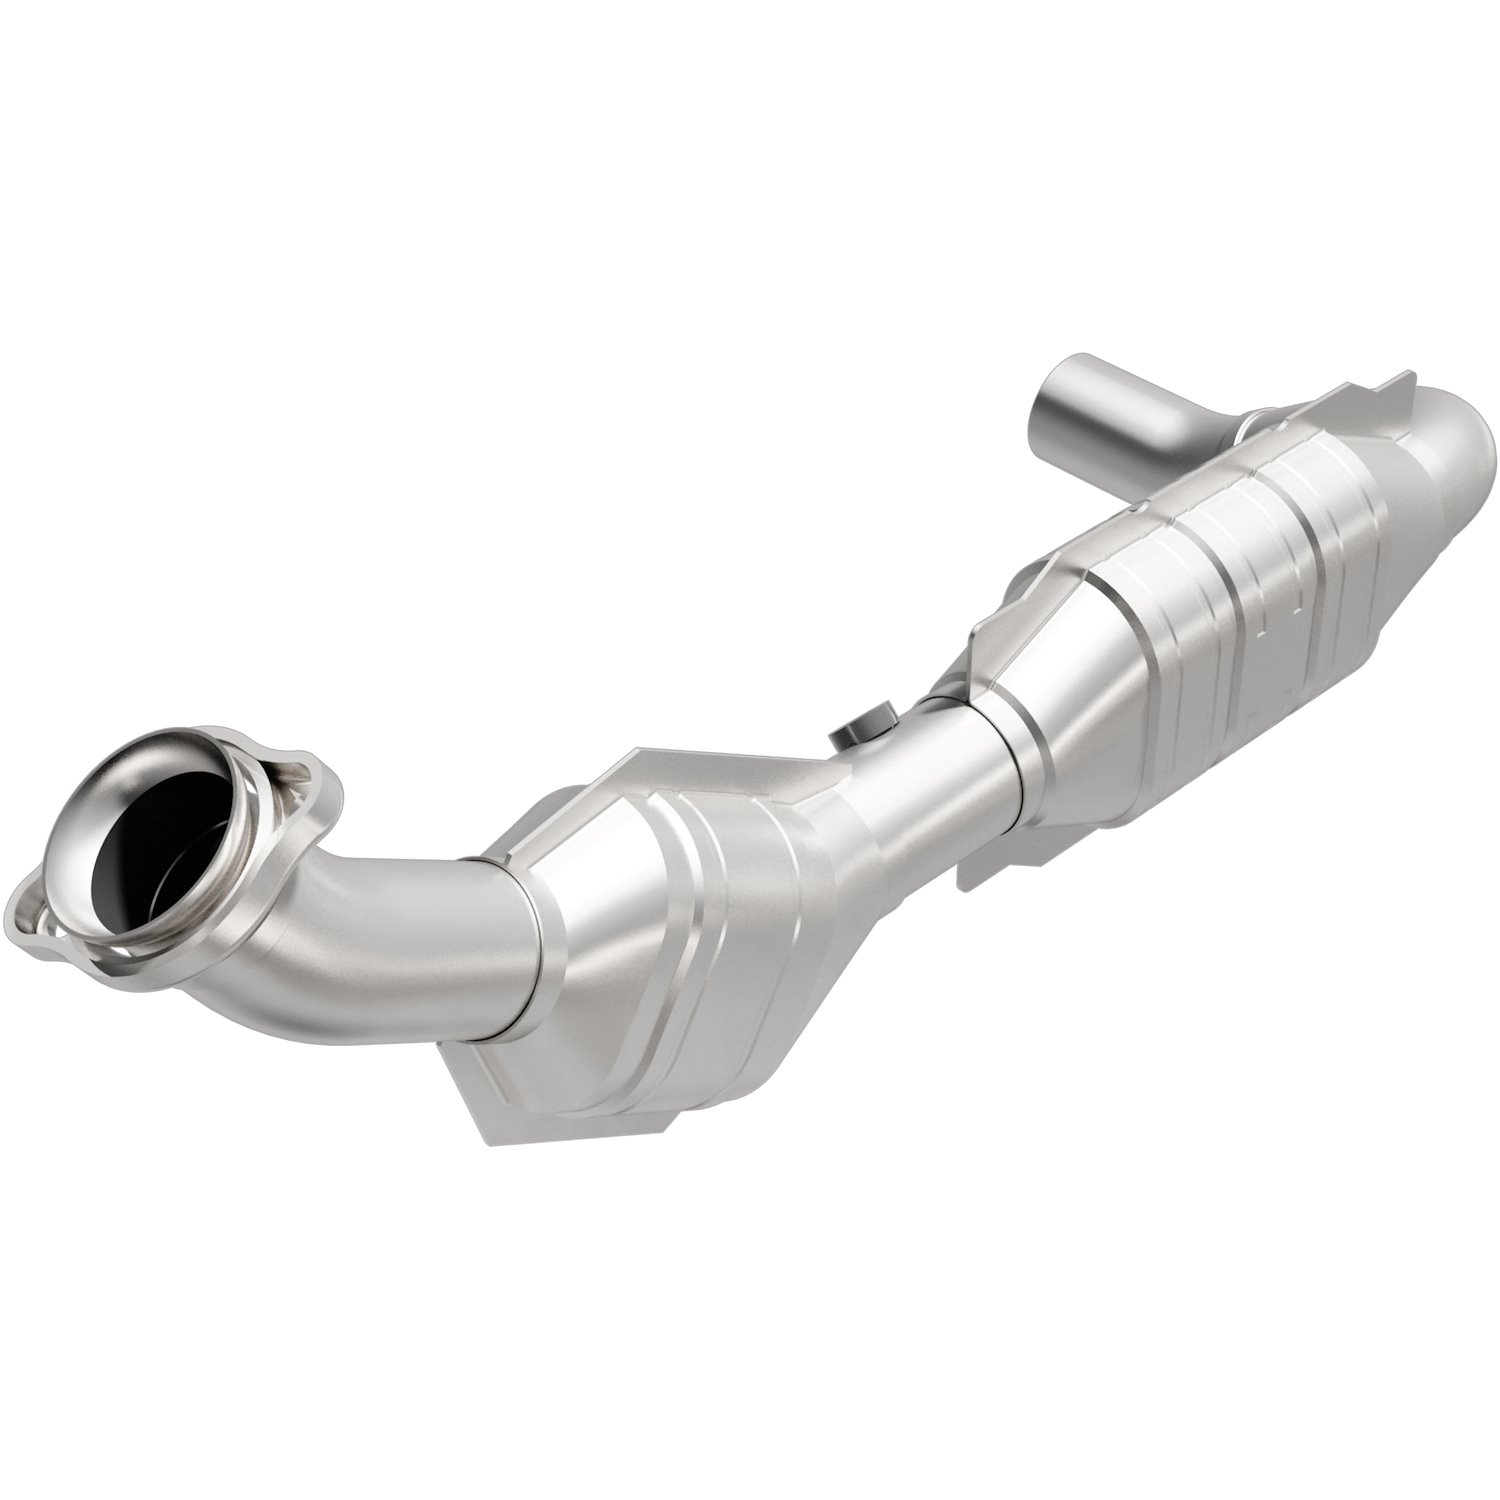 2003-2004 Ford Expedition OEM Grade Federal / EPA Compliant Direct-Fit Catalytic Converter